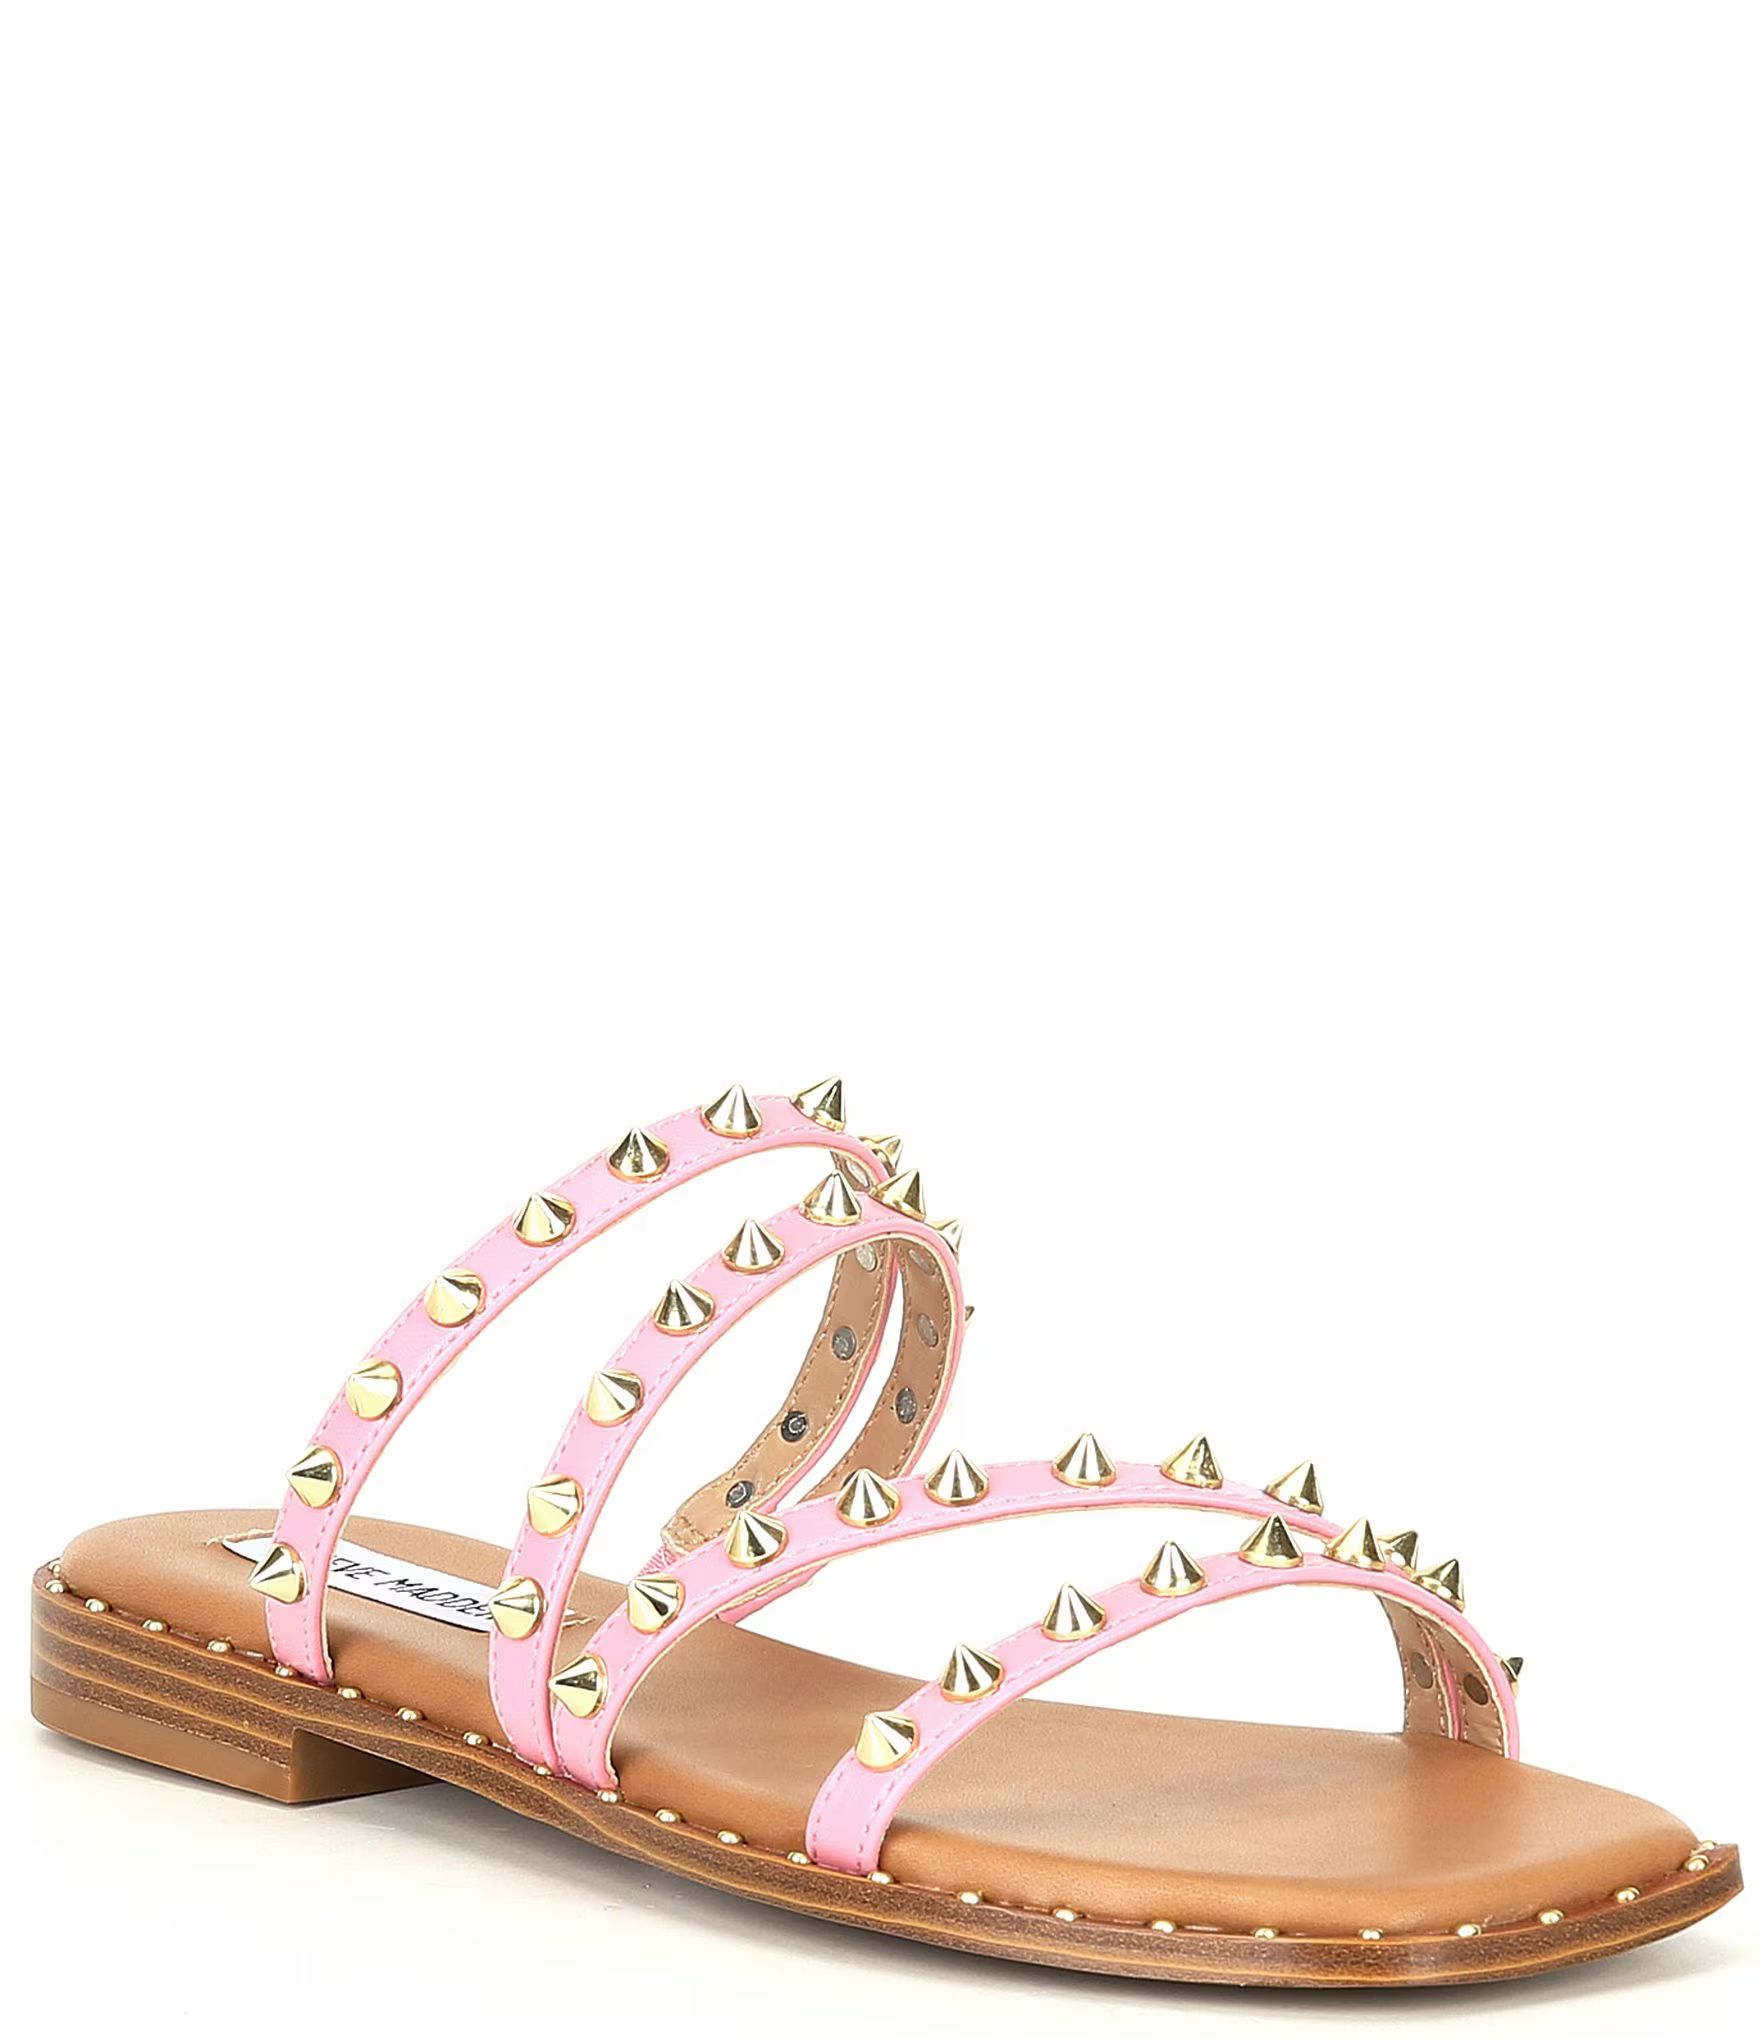 Selina Spiked Square Toe Sandals | Dillards